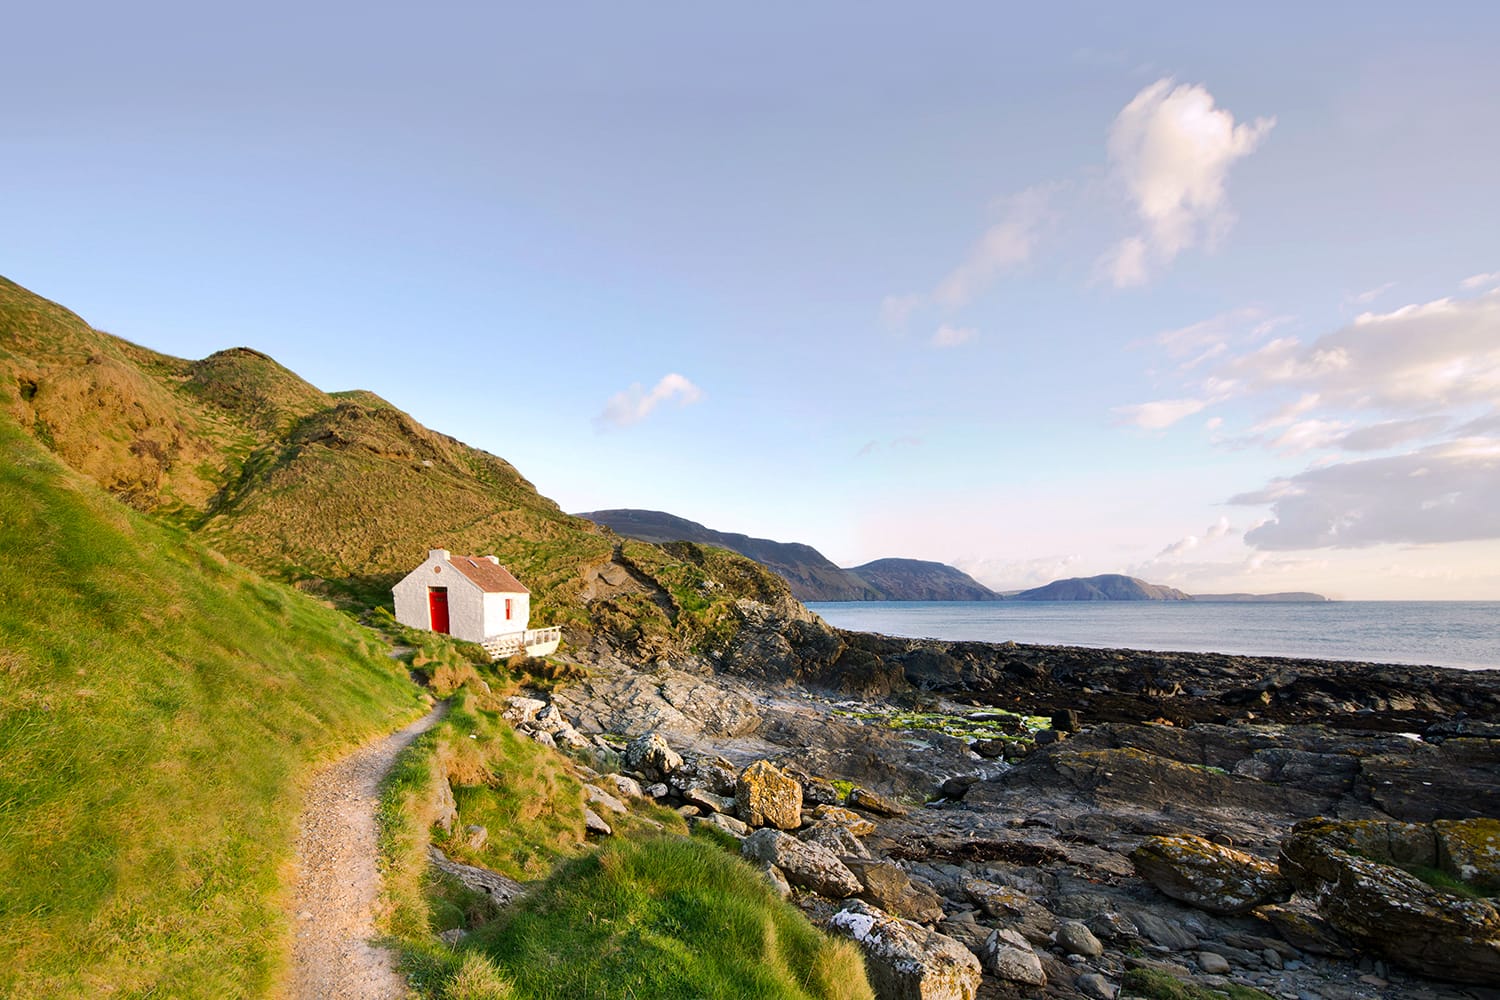 Path to the White Fisherman Cottage on a coast - Niarbyl on the Isle of Man